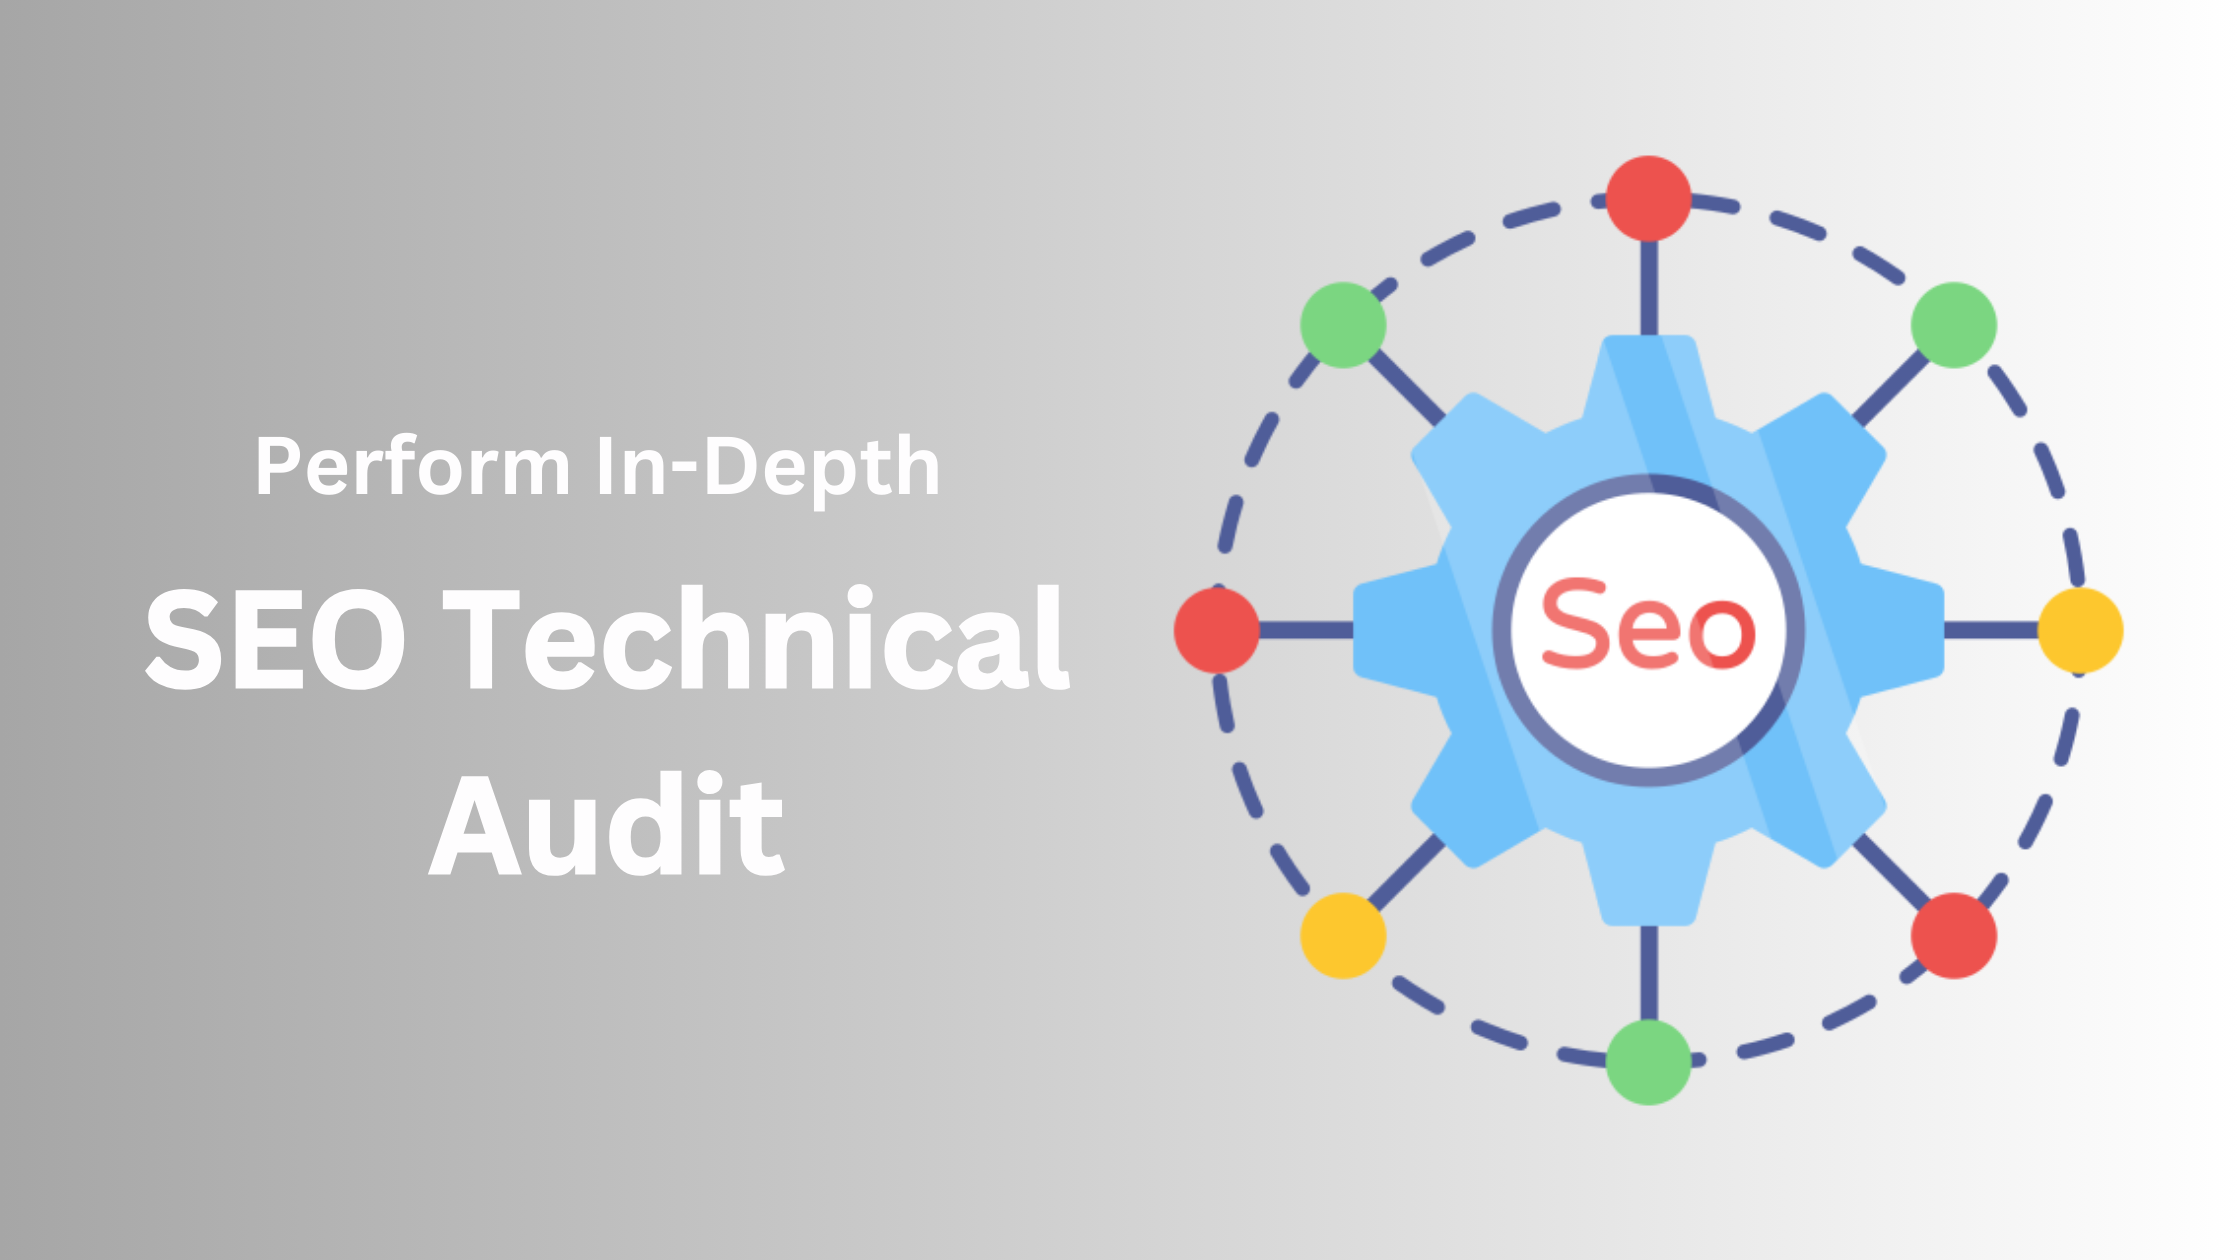 12 Steps To Perform A Technical SEO Audit – In-Depth SEO Technical Audit Guide